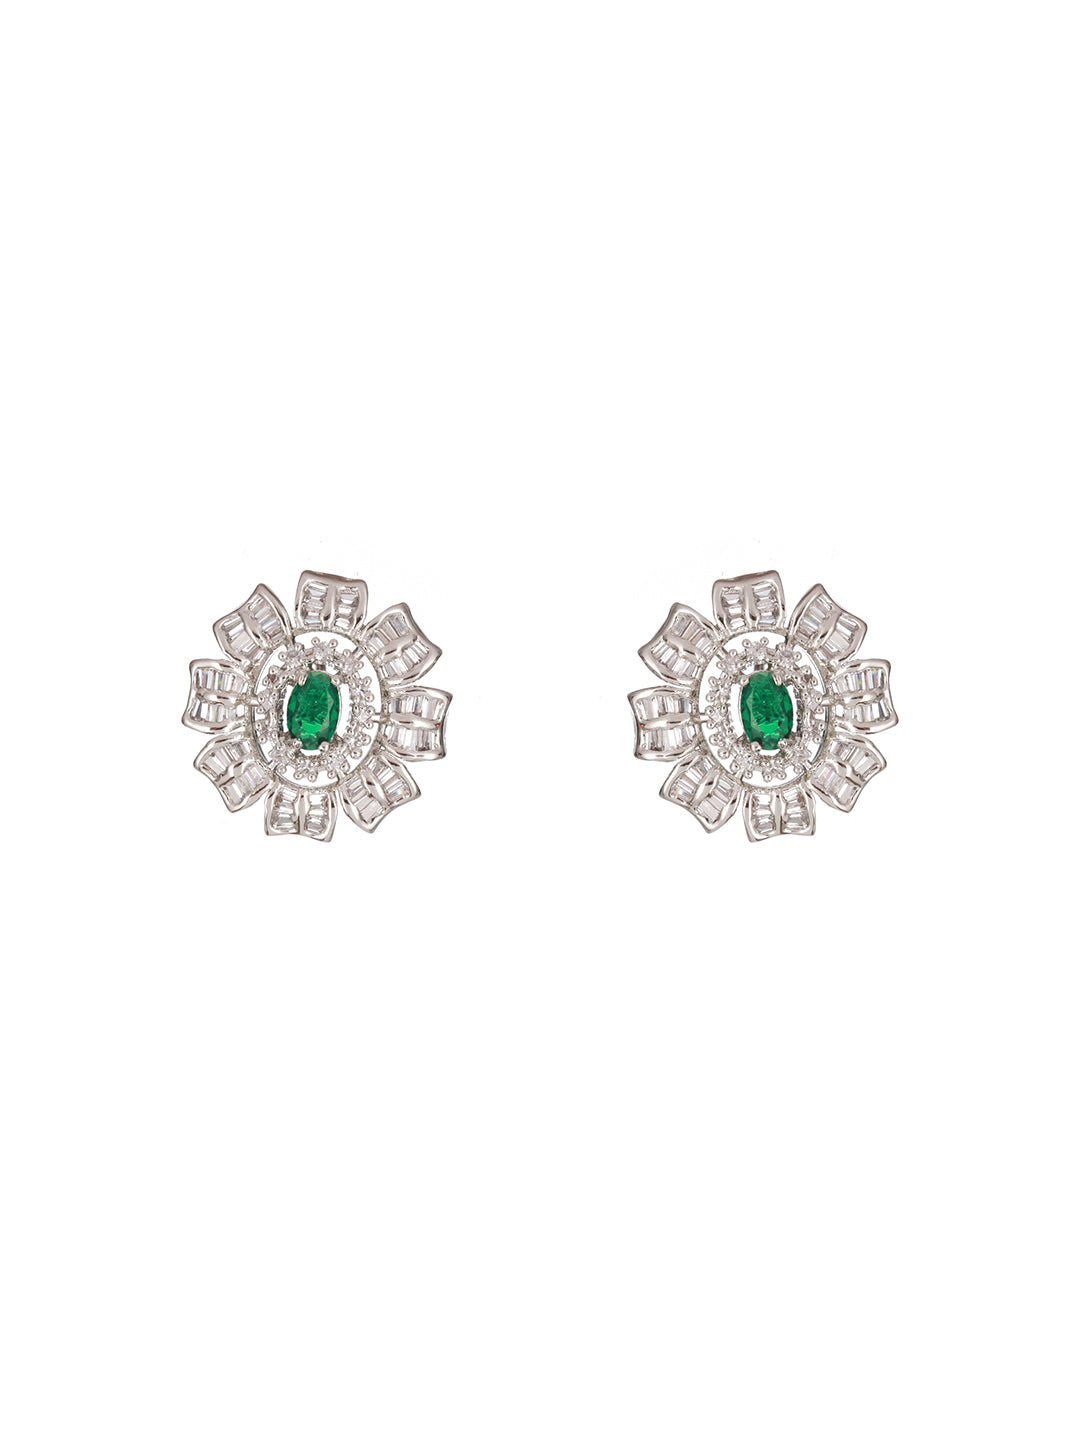 Green Floral American Diamond Silver-Plated Jewellery Set